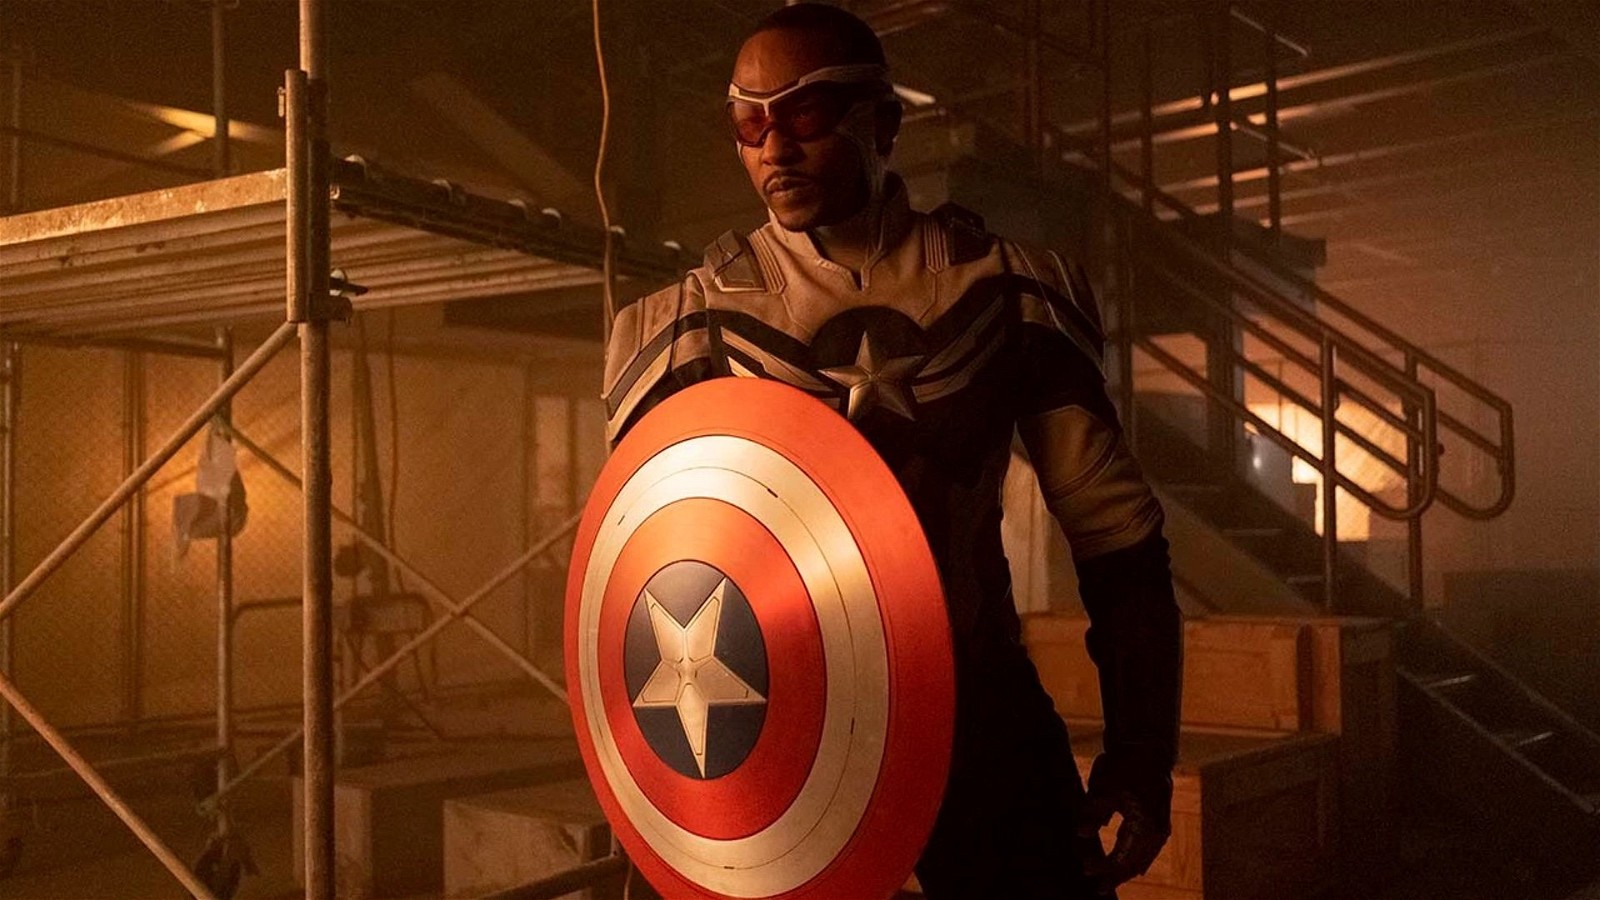 Anthony Mackie as the new Captain America